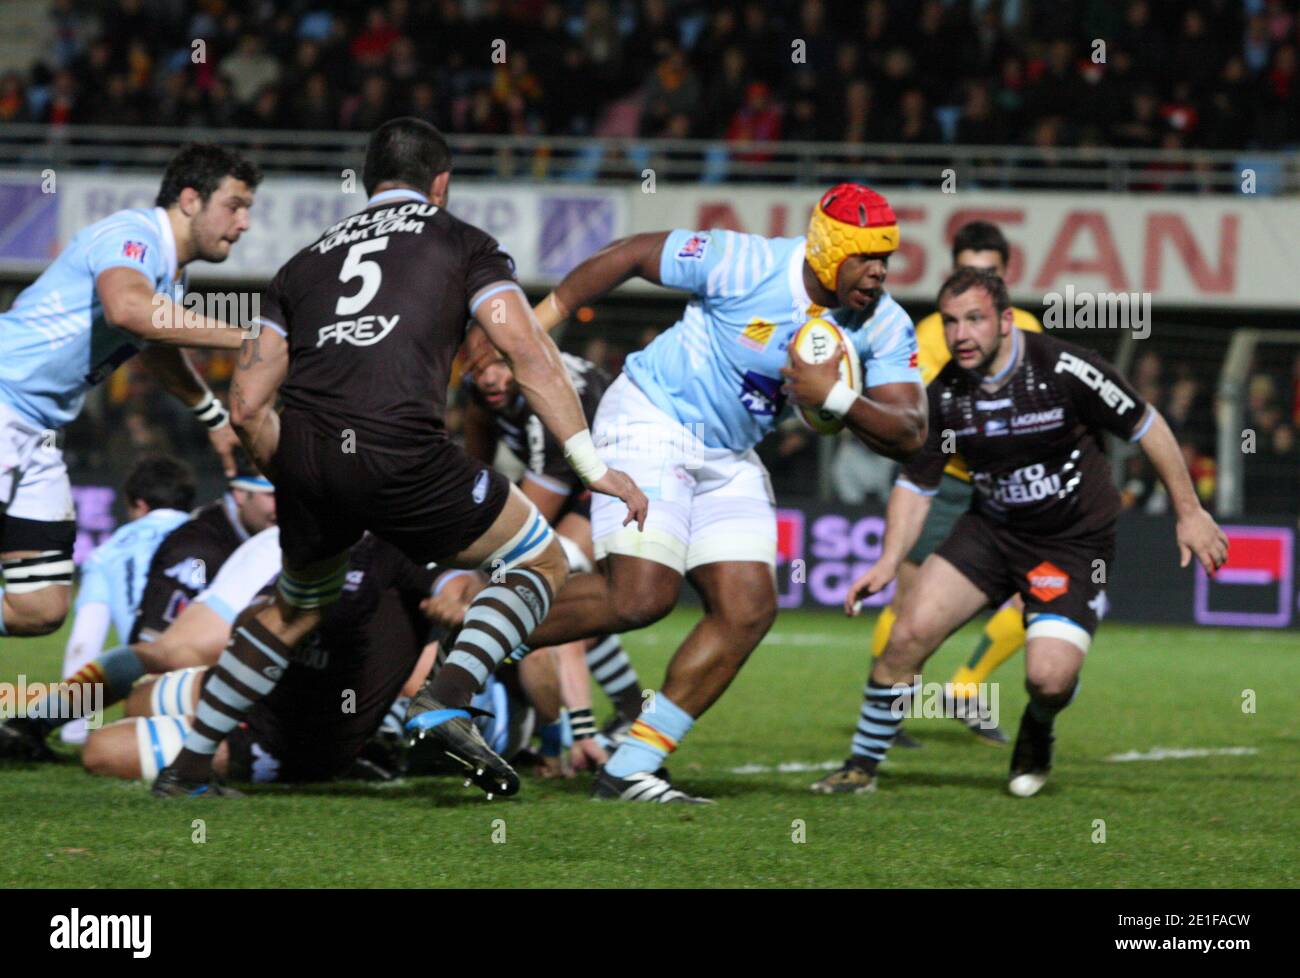 USA Perpignans Robins Tchale Watchou during the french Top 14 rugby match USAP vs Union Bordeaux-Begles